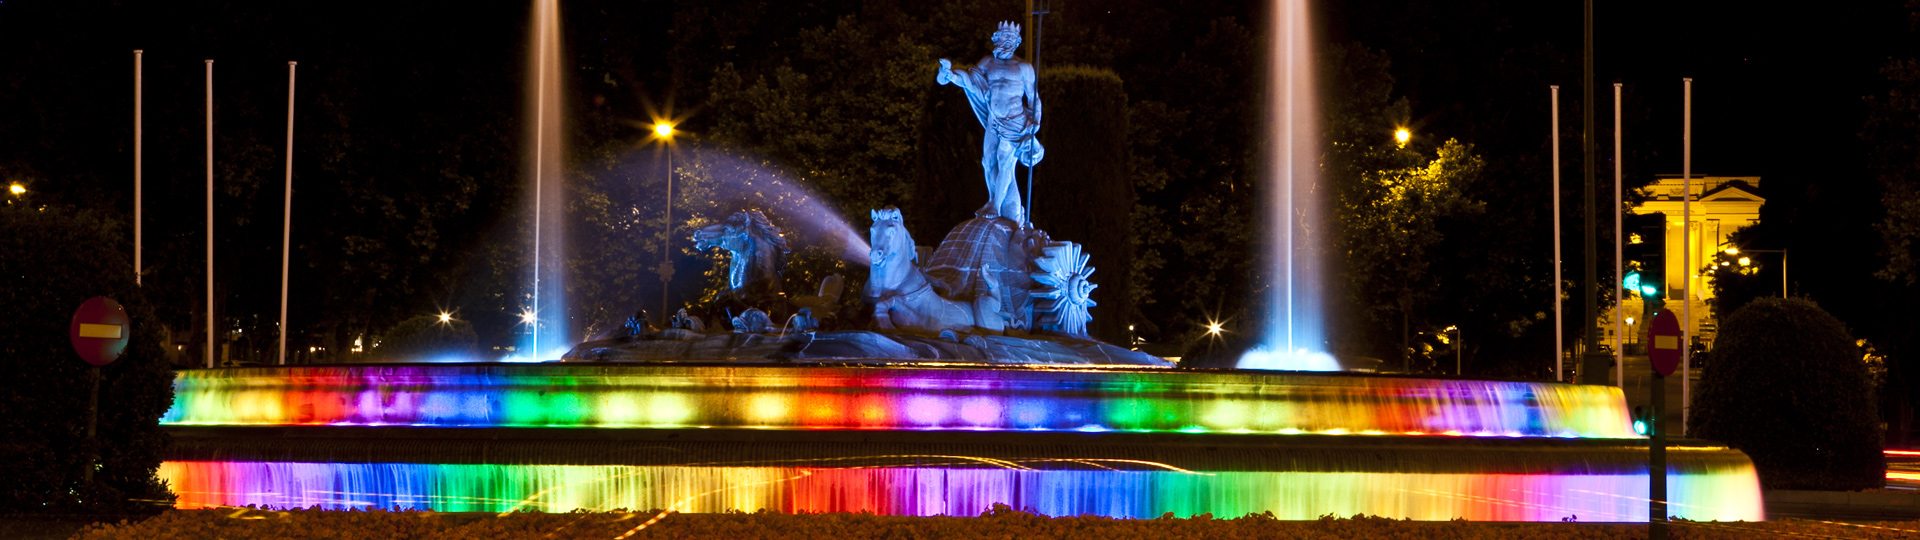 The Neptune Fountain in Madrid suitably attired for World Pride Day 